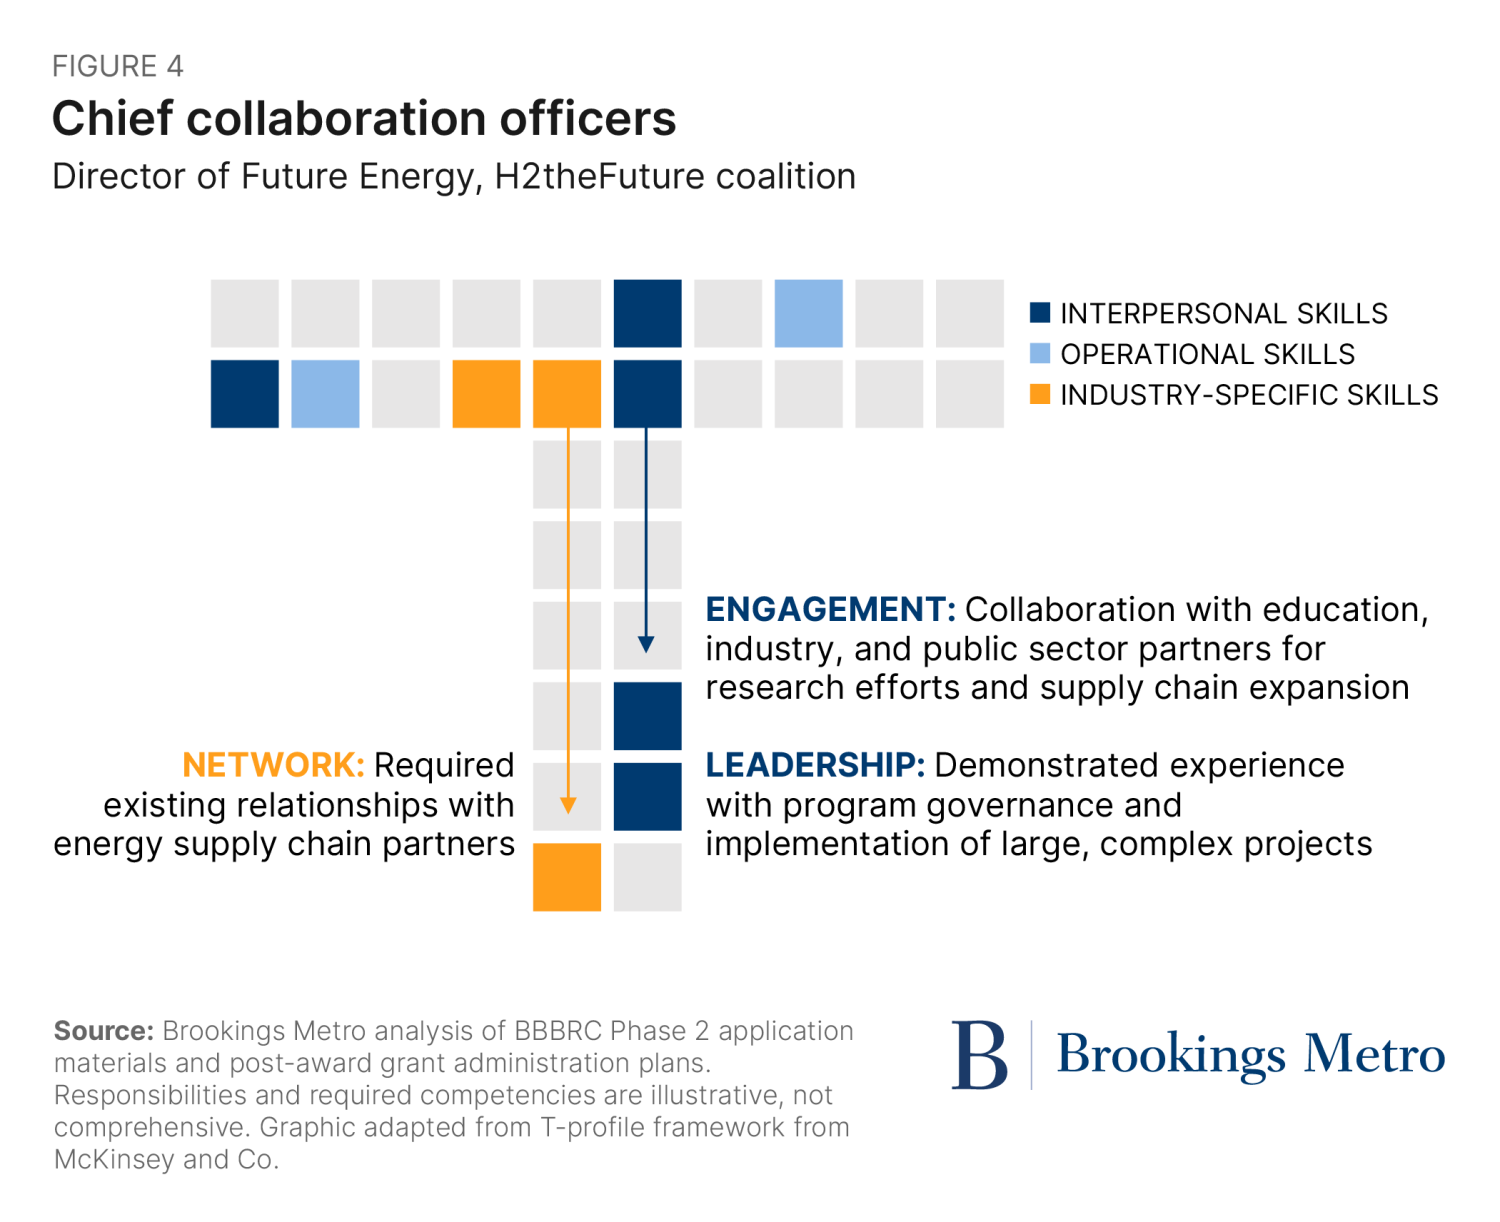 Figure 4. CHIEF COLLABORATION OFFICERS. Director of Future Energy, H2theFuture coalition